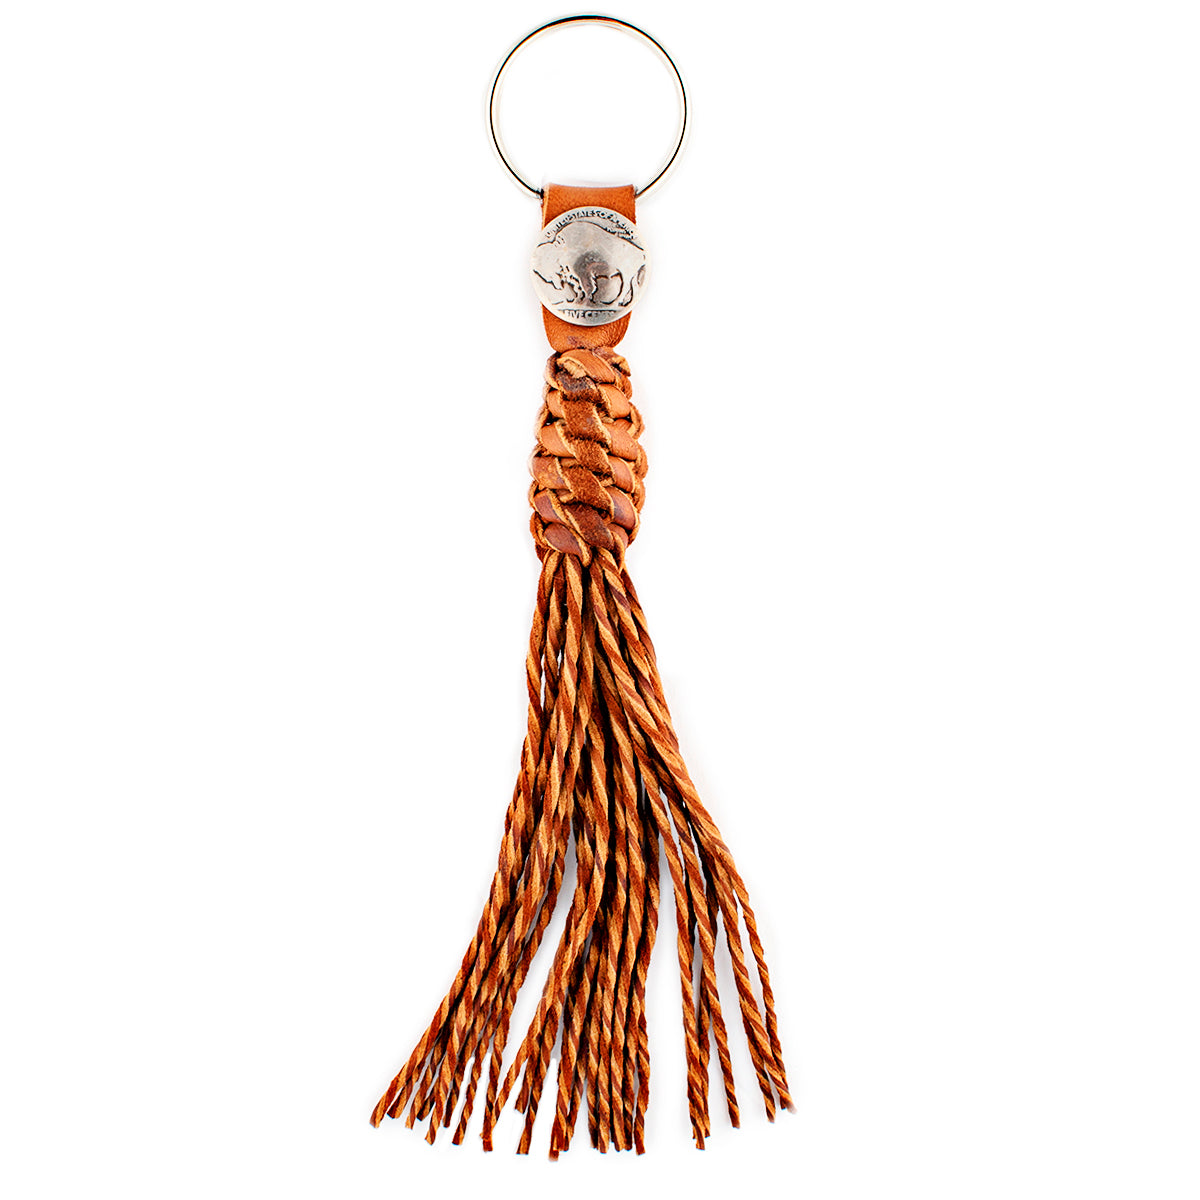 Lampman Twisted Leather Fringe Key Chain - Brown/Tobacco